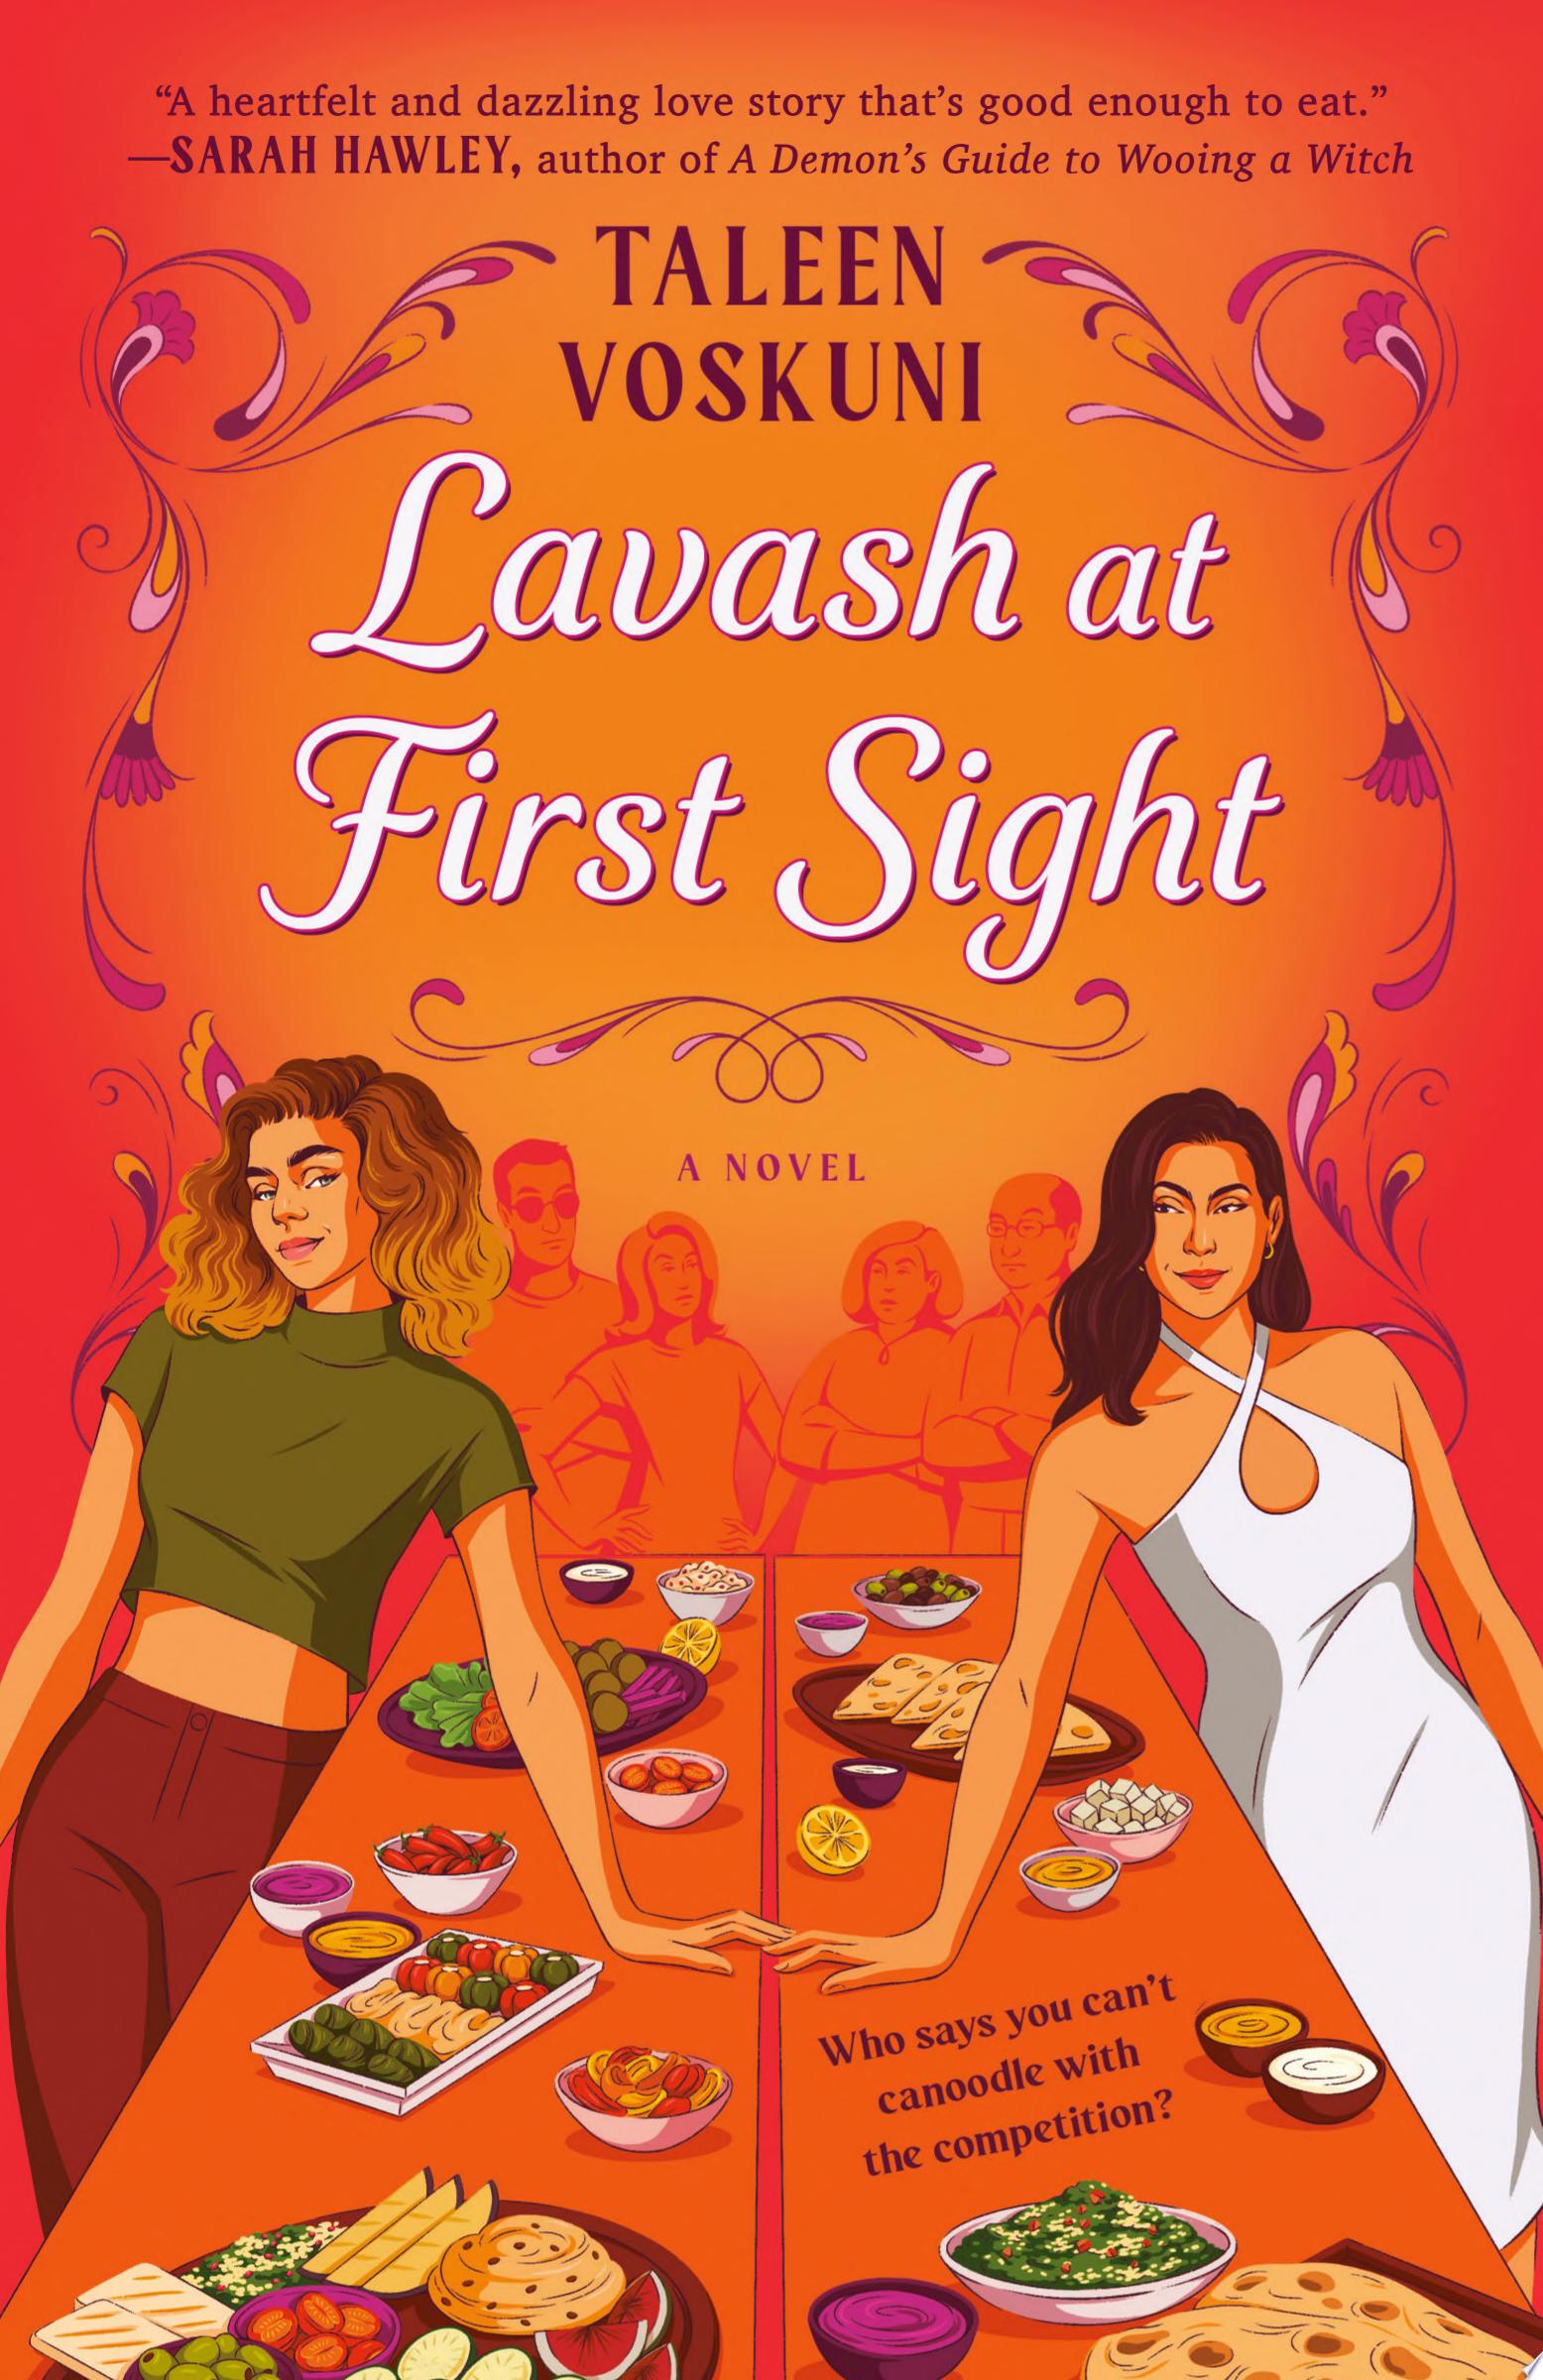 Image for "Lavash at First Sight"